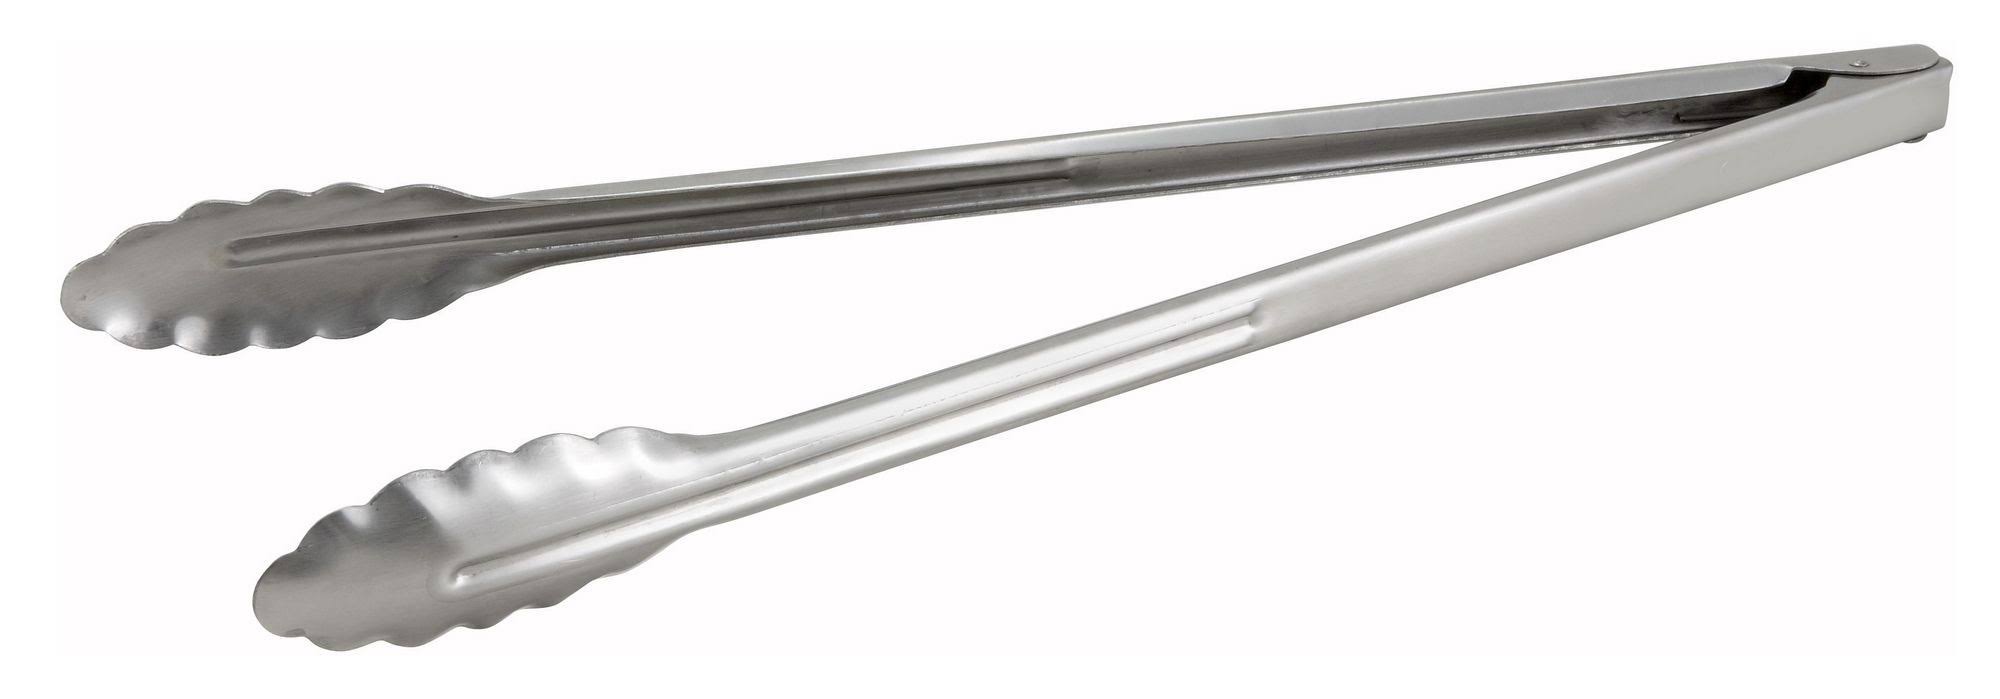 Winco Stainless Steel Utility Tong - 16"